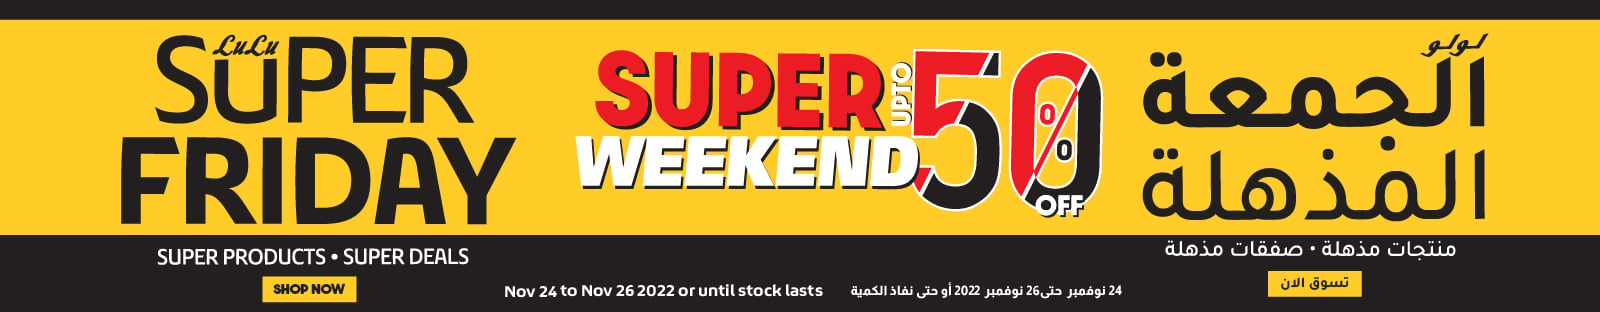 Super friday banners new-01.jpg